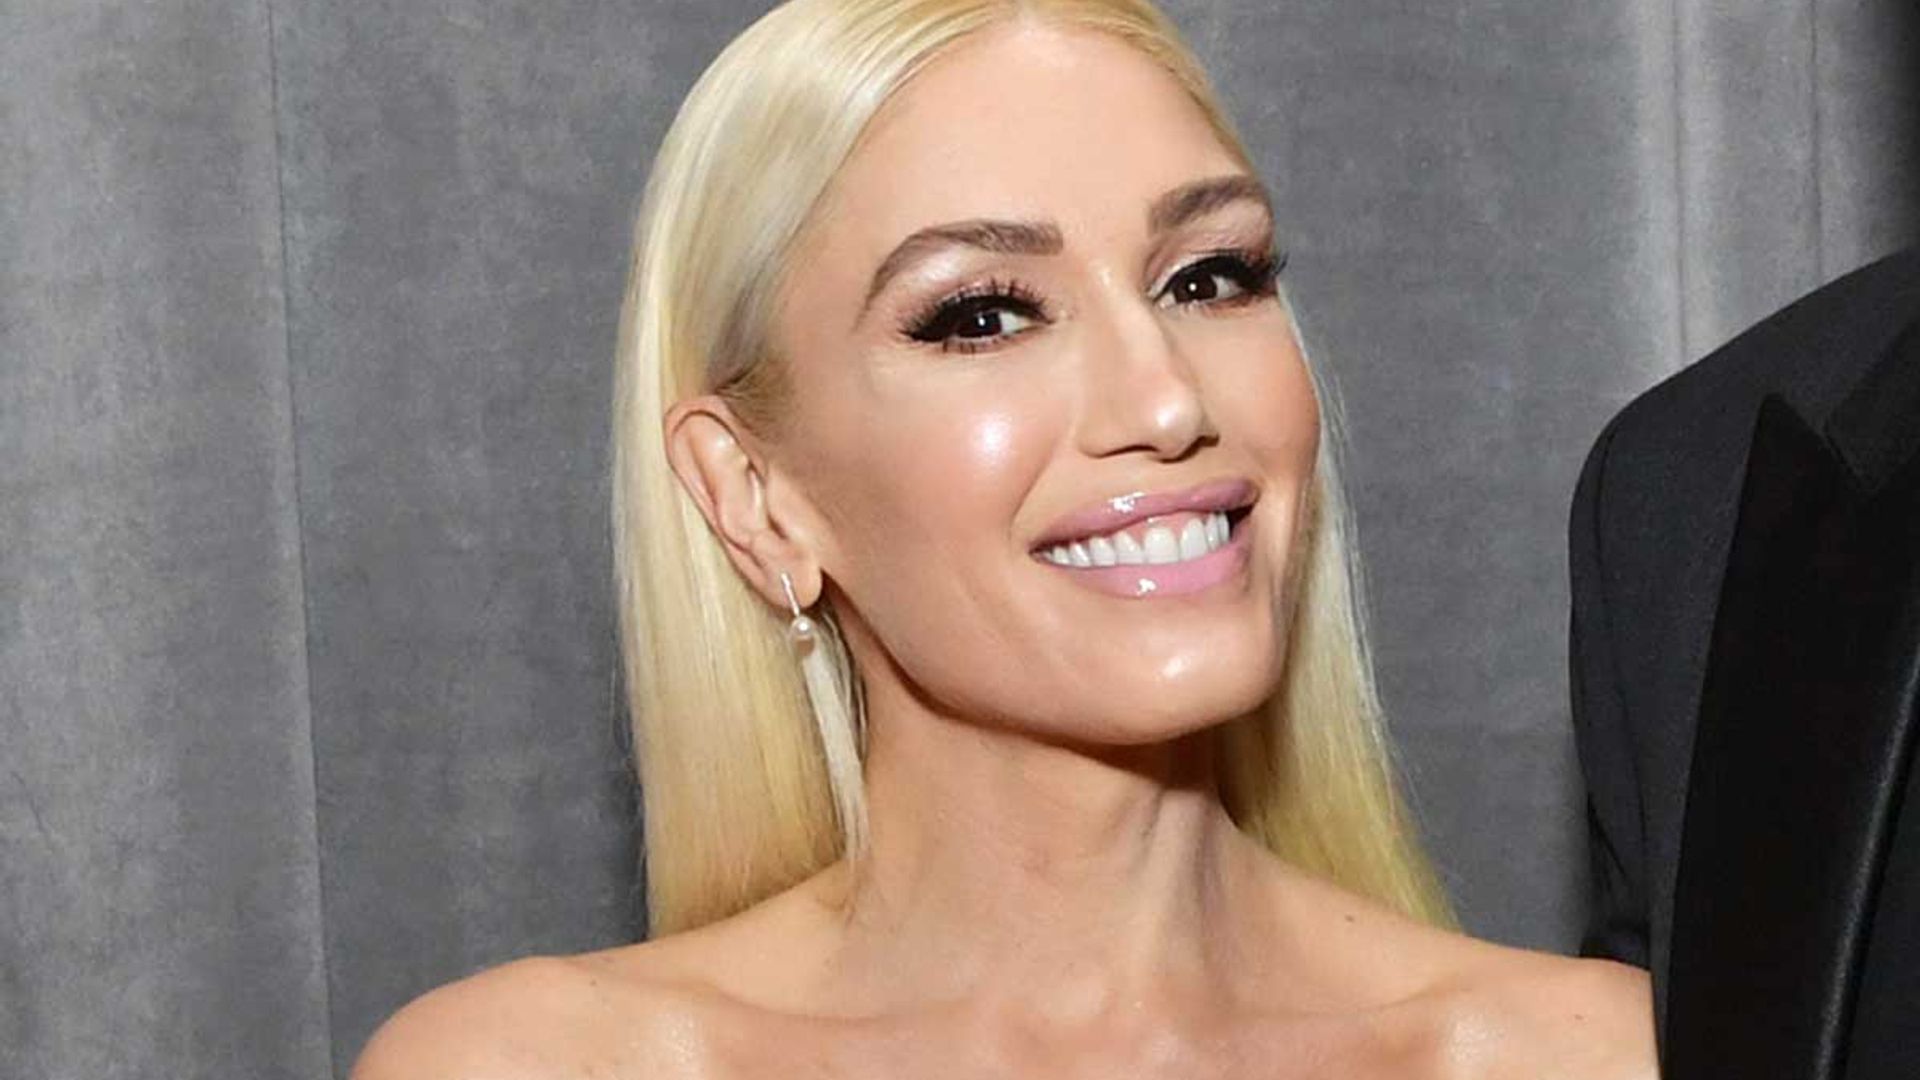 Gwen Stefani marks son Kingston's 16th birthday with incredible family photo